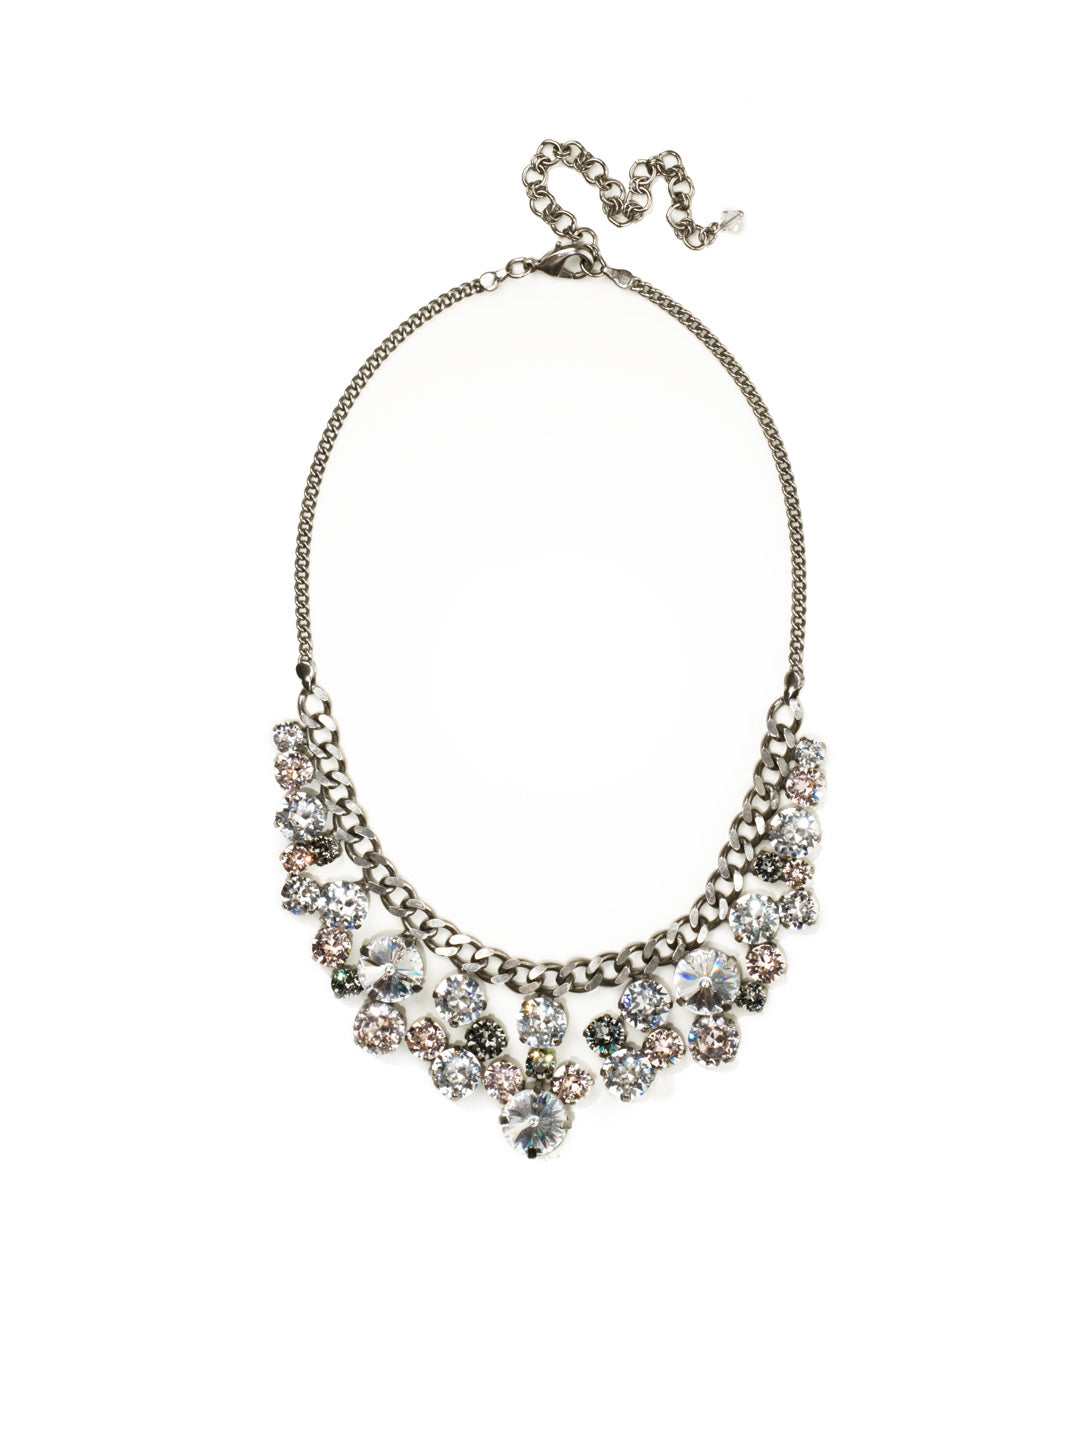 Product Image: Round Crystal Cluster Bib Necklace Statment Necklace